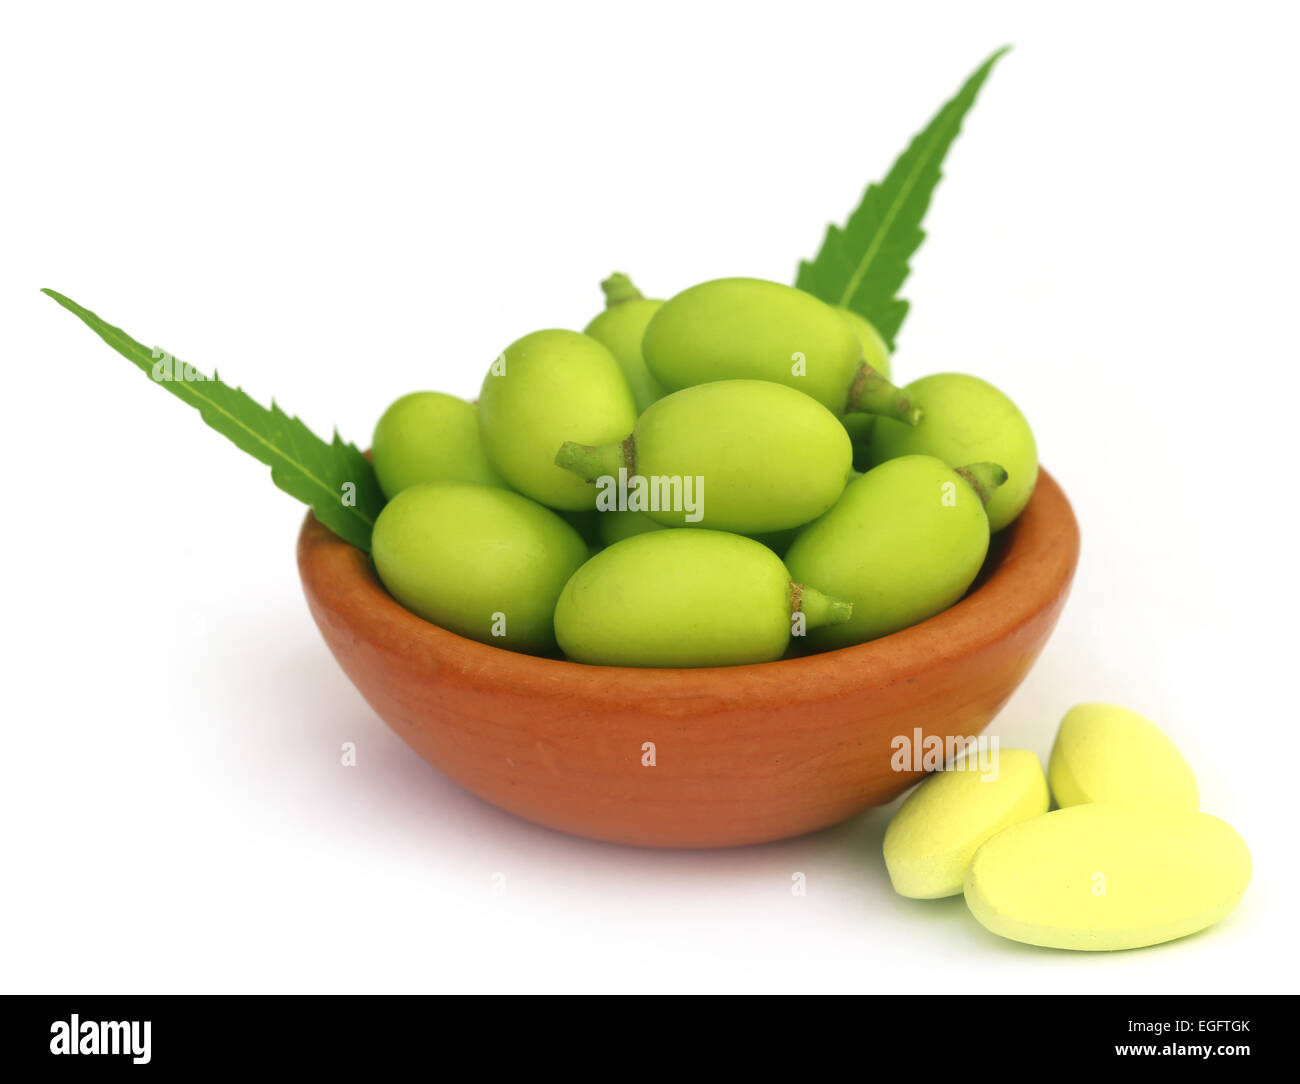 Medicinal neem fruits with tablets over white background Stock Photo